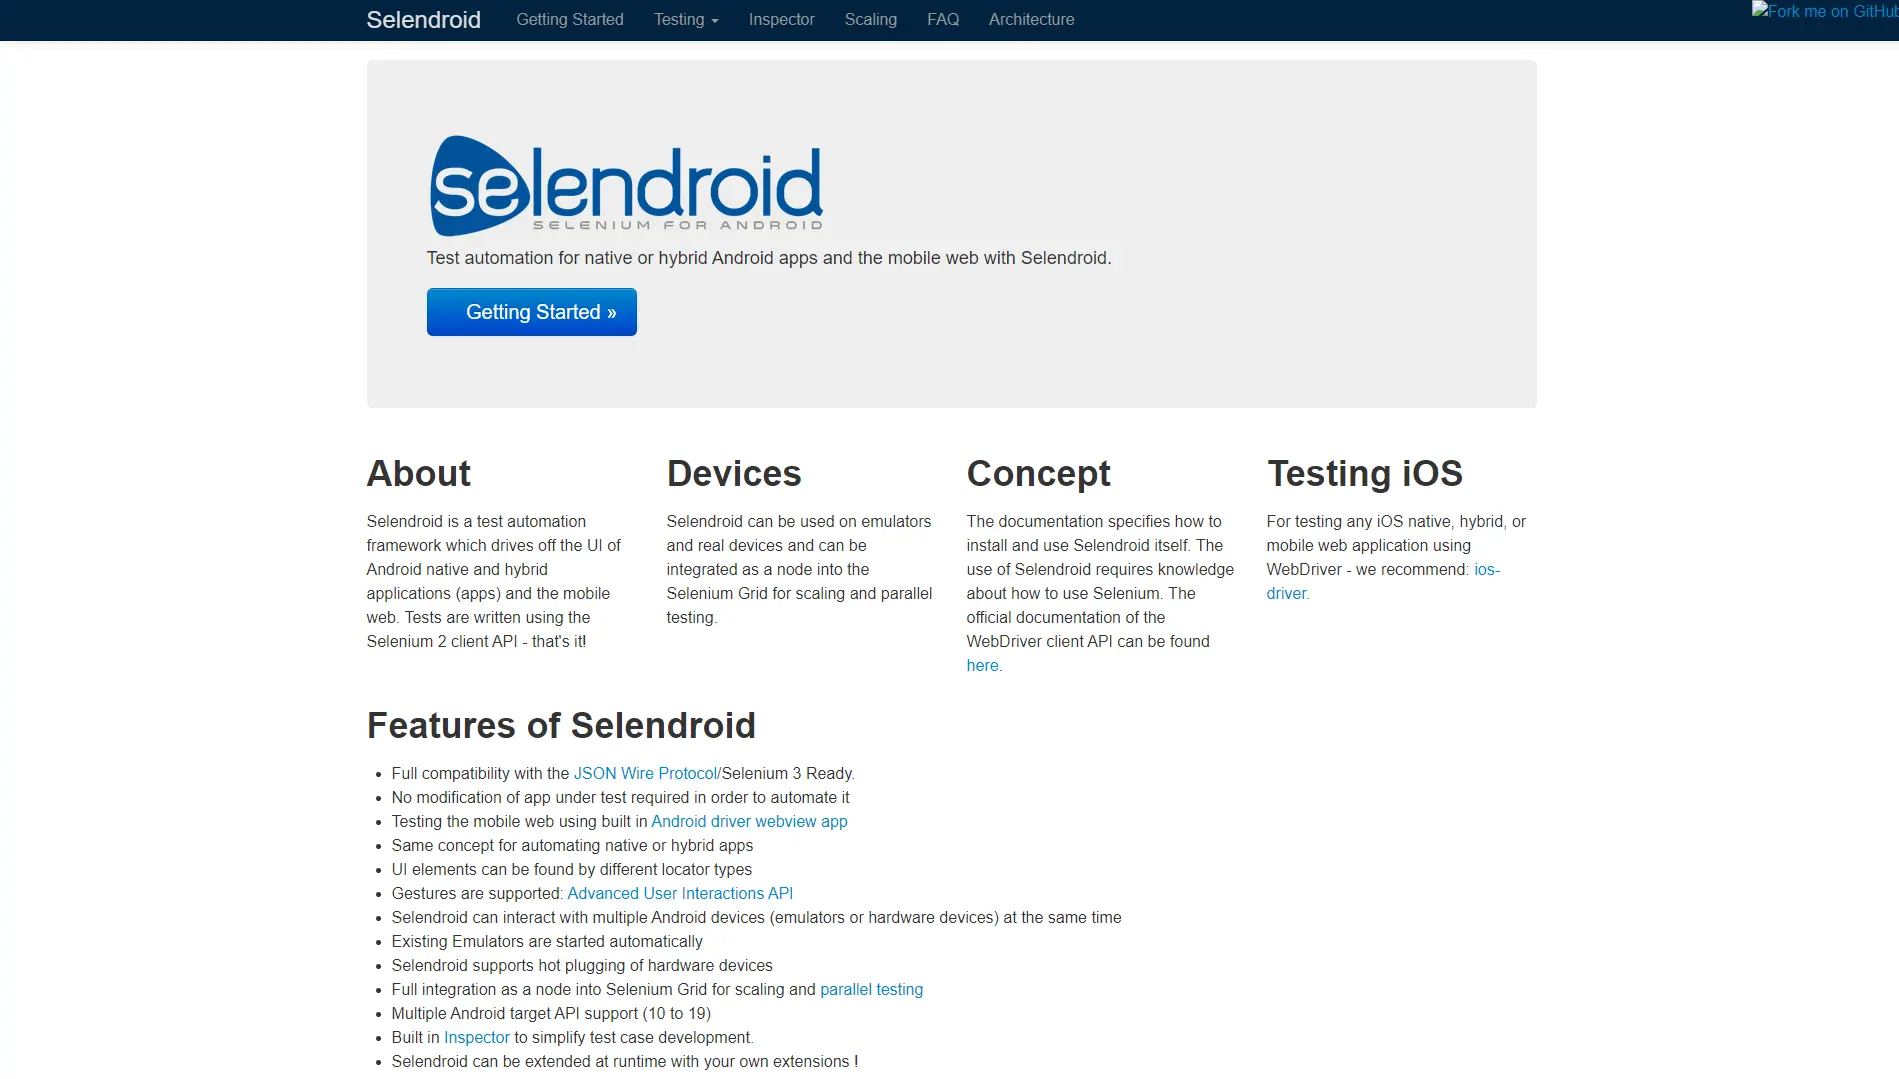 Selendroid site's homepage image.